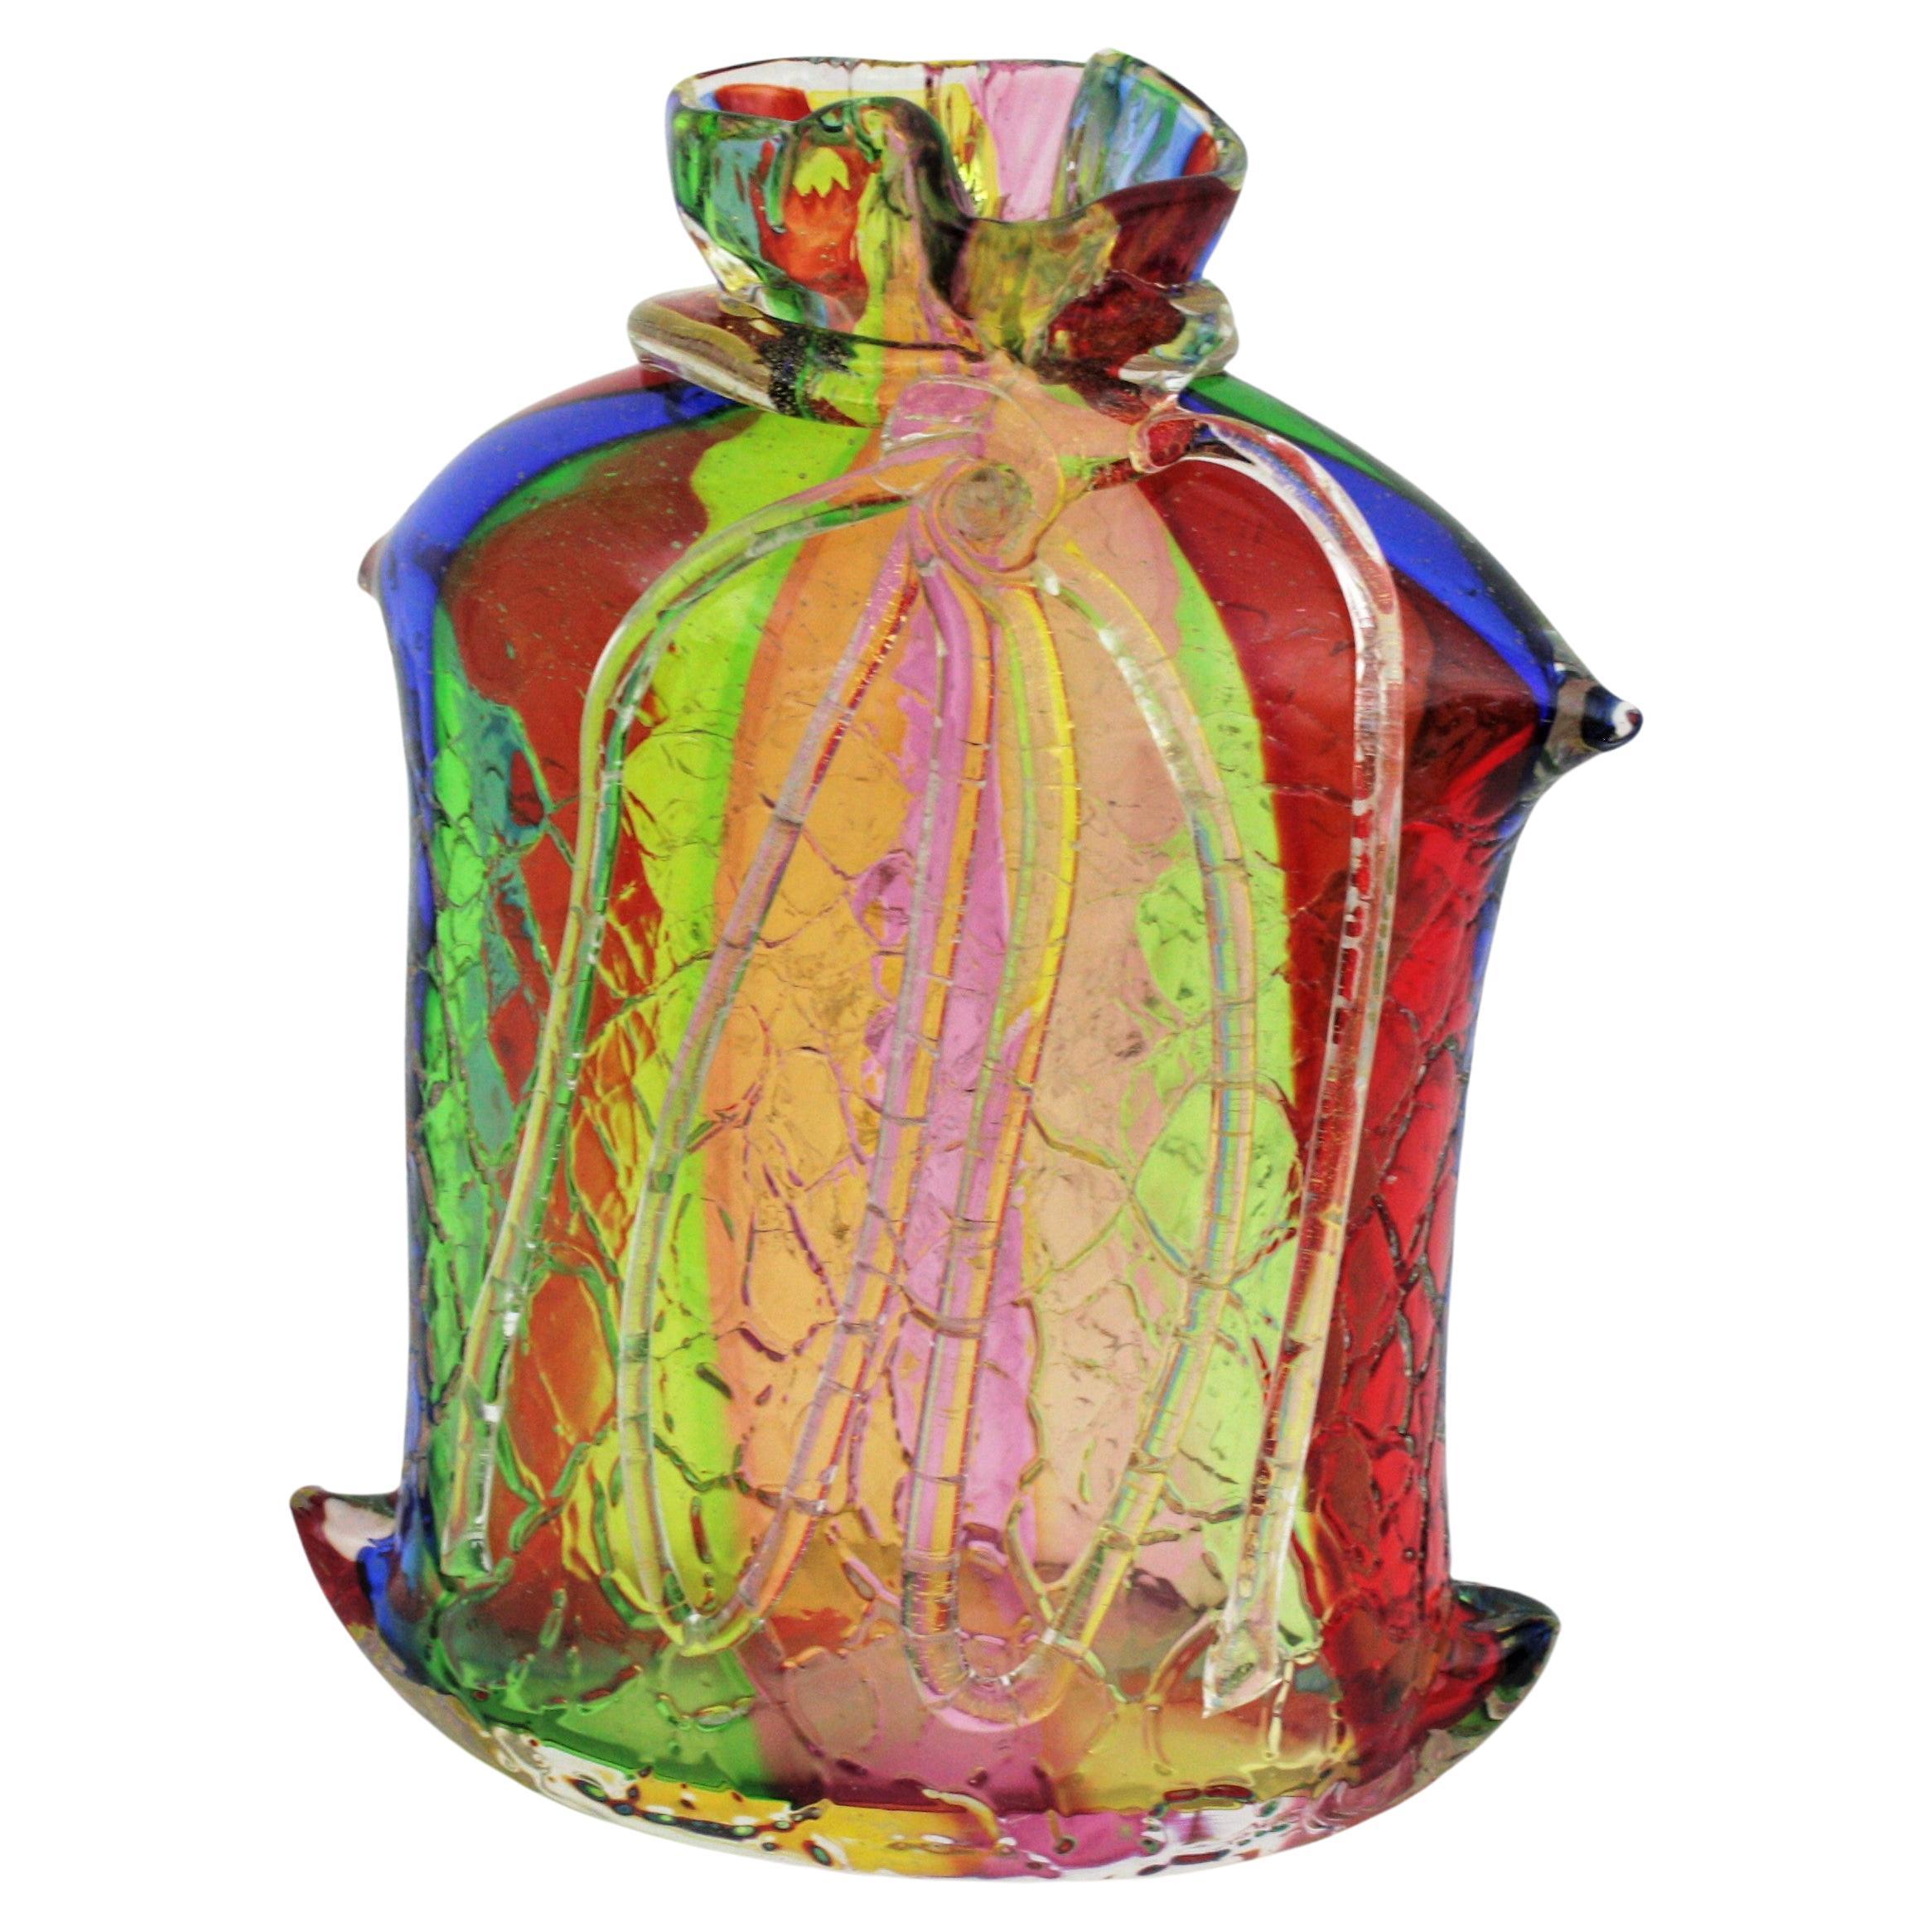 One of a kind hand blown multi-color rainbow stripped large vase with rope detail. Attributed to Fratelli Toso, Italy, 1950s.
This stunning large tied rope sack bag shaped art glass vase is made of multi-color thick stripes submerged into clear